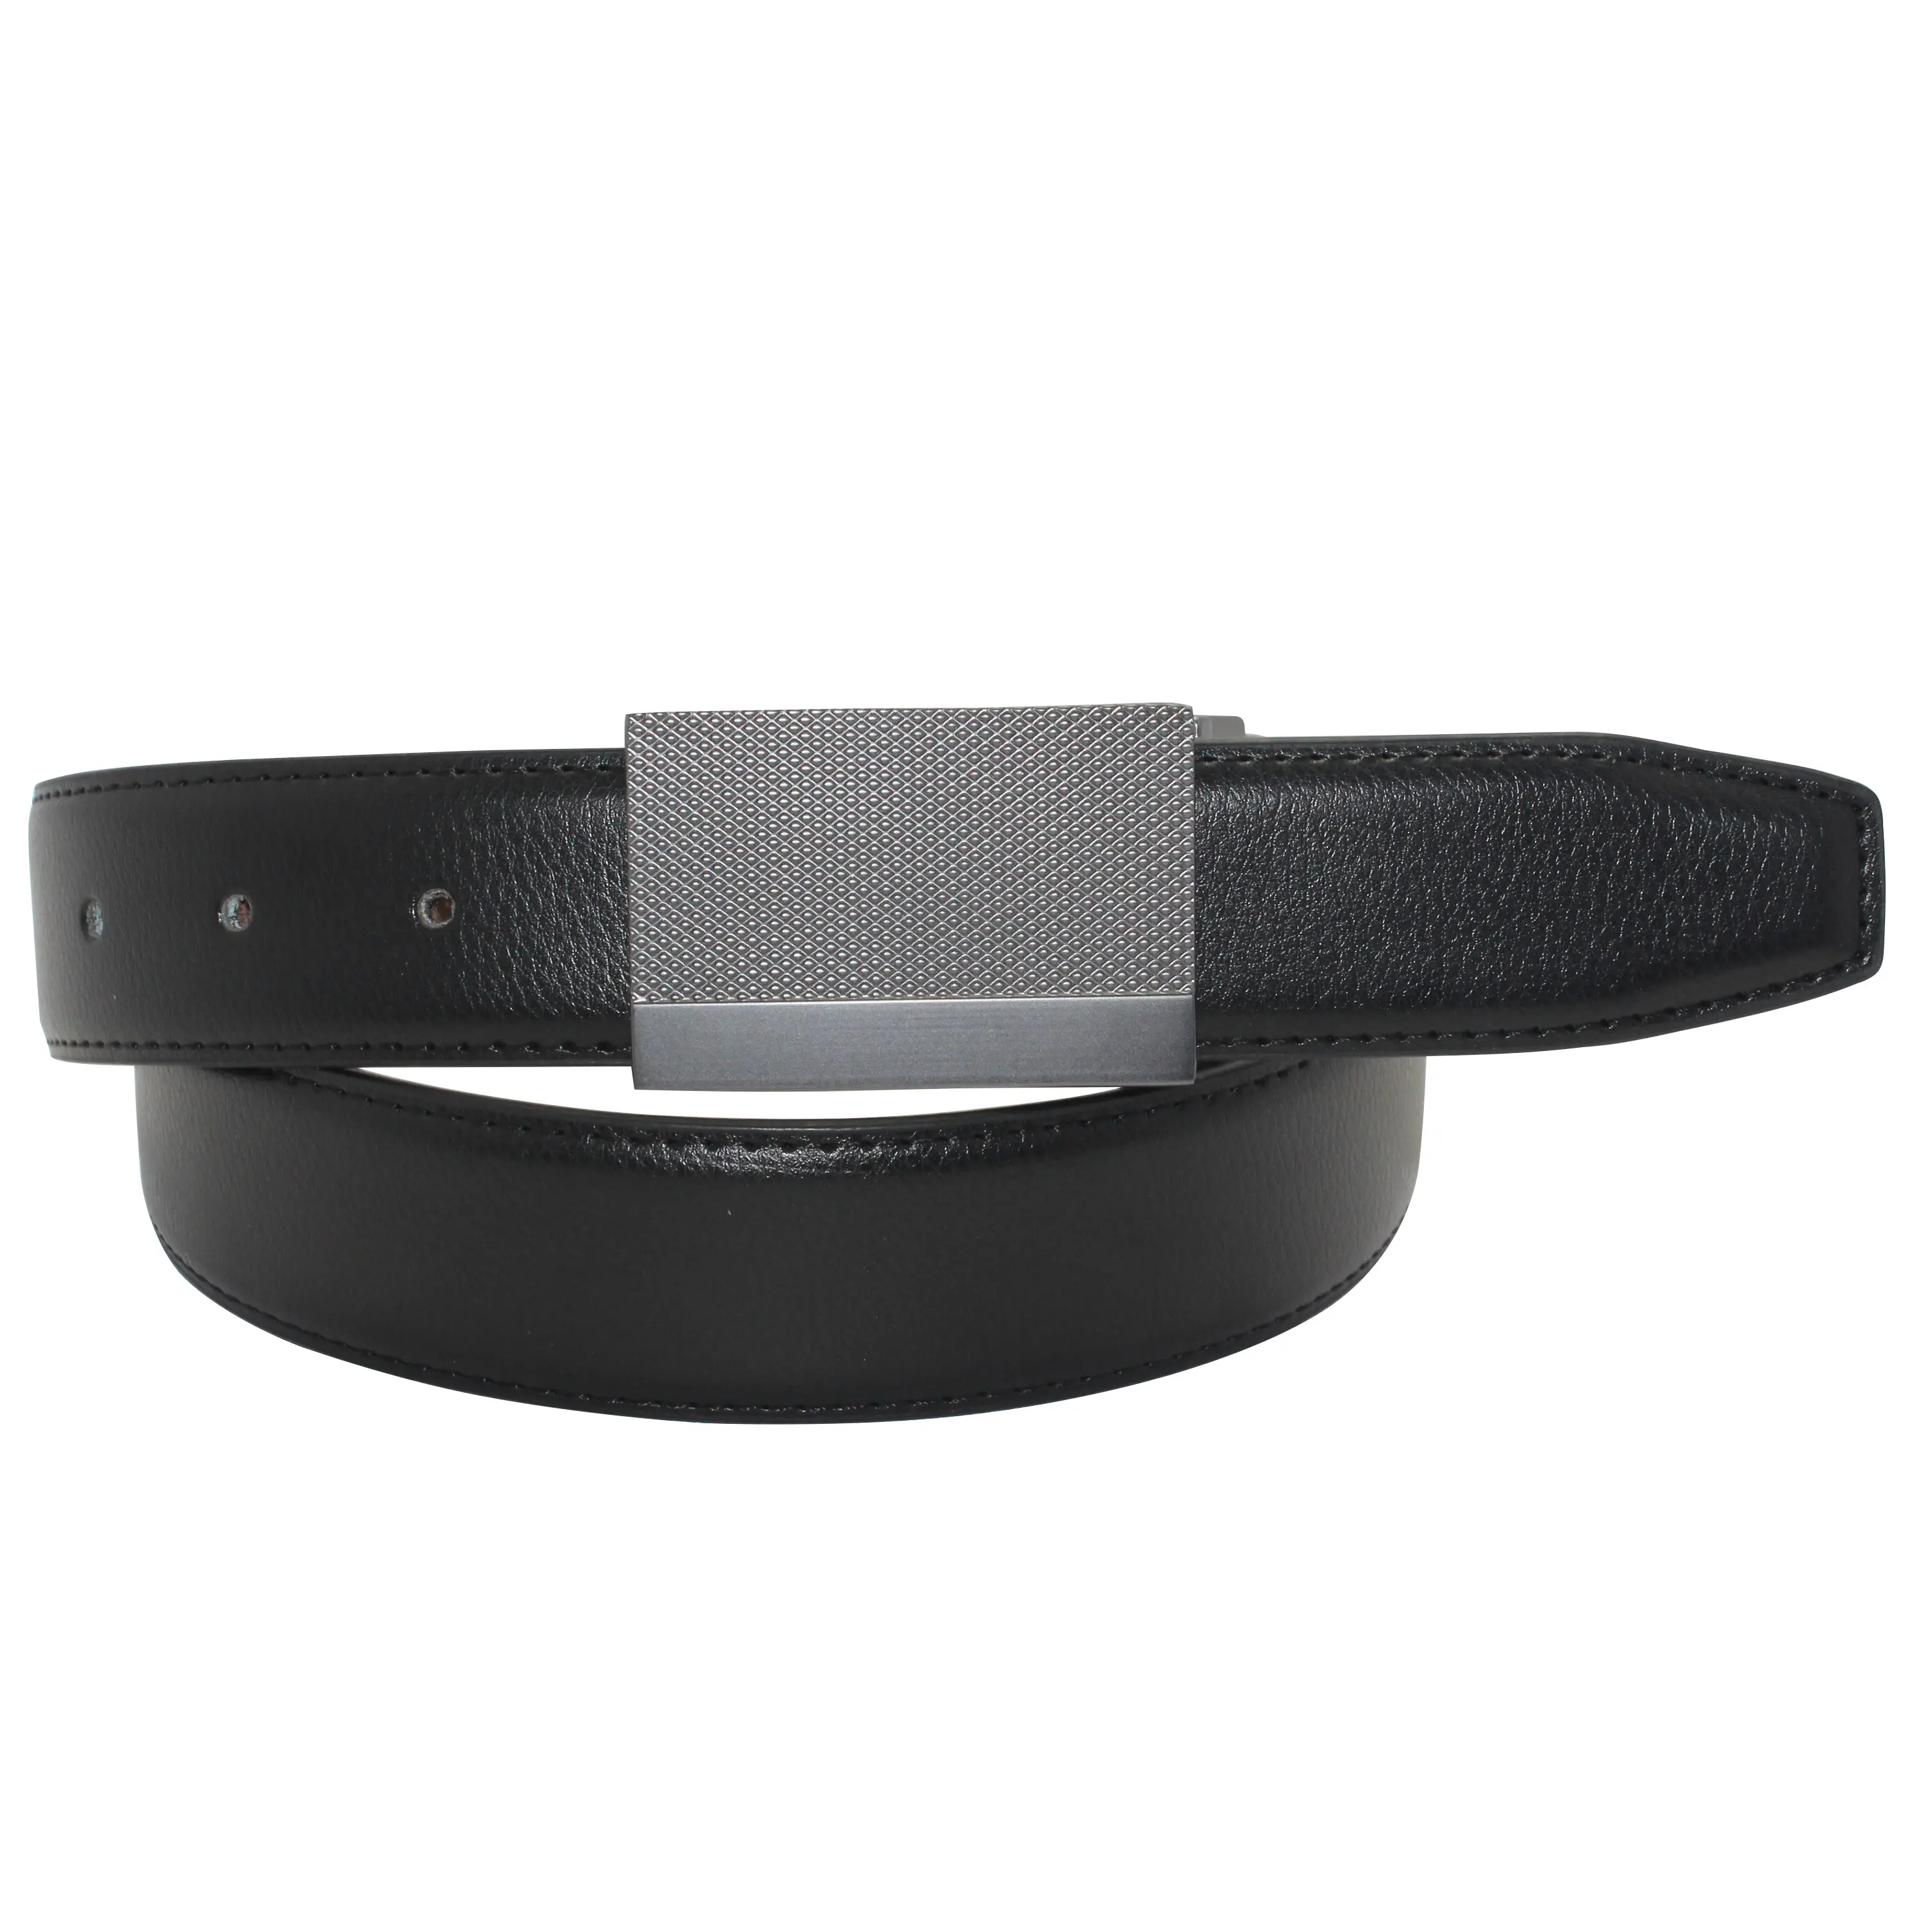 Elevate your style with a modern reversible belt – a unique design for everyday elegance